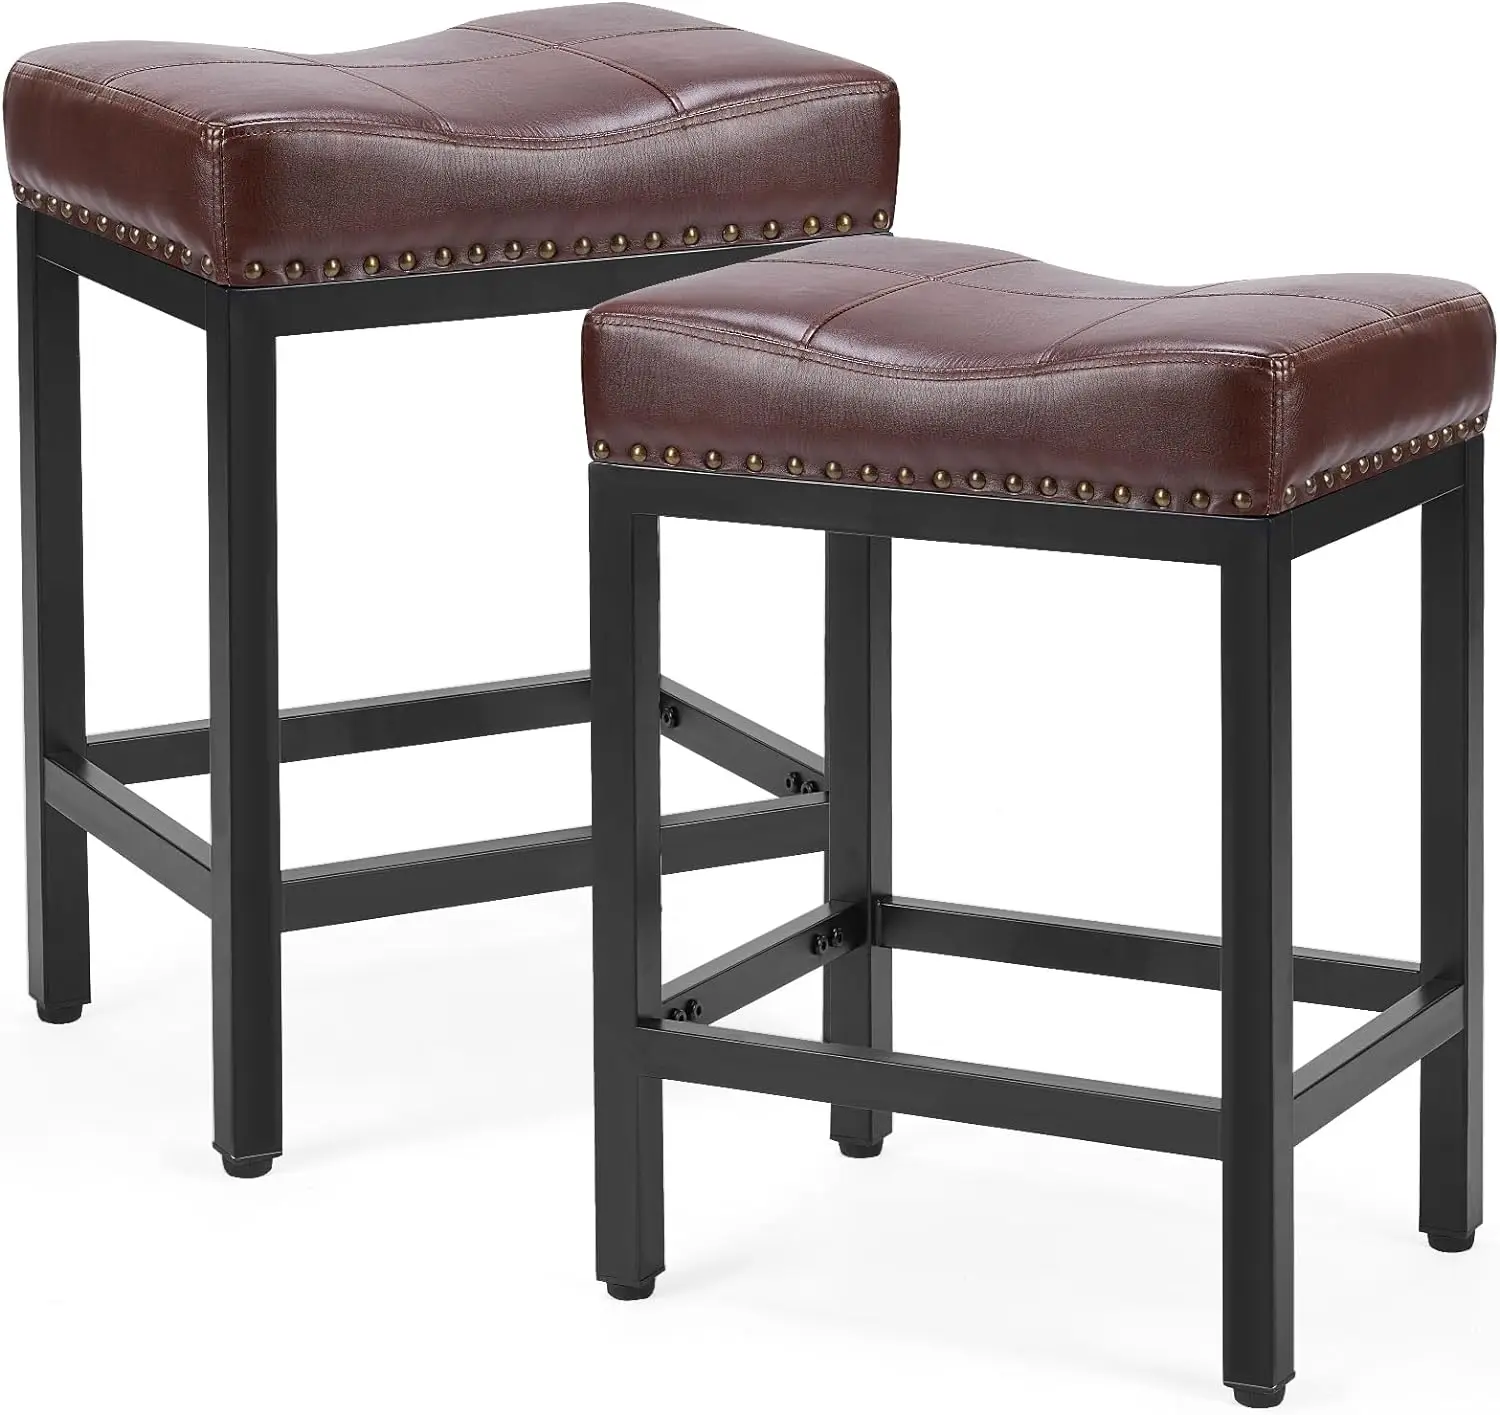 

24" Counter Height Bar Chairs Upholstered Brown Set of 2 Saddle Stools